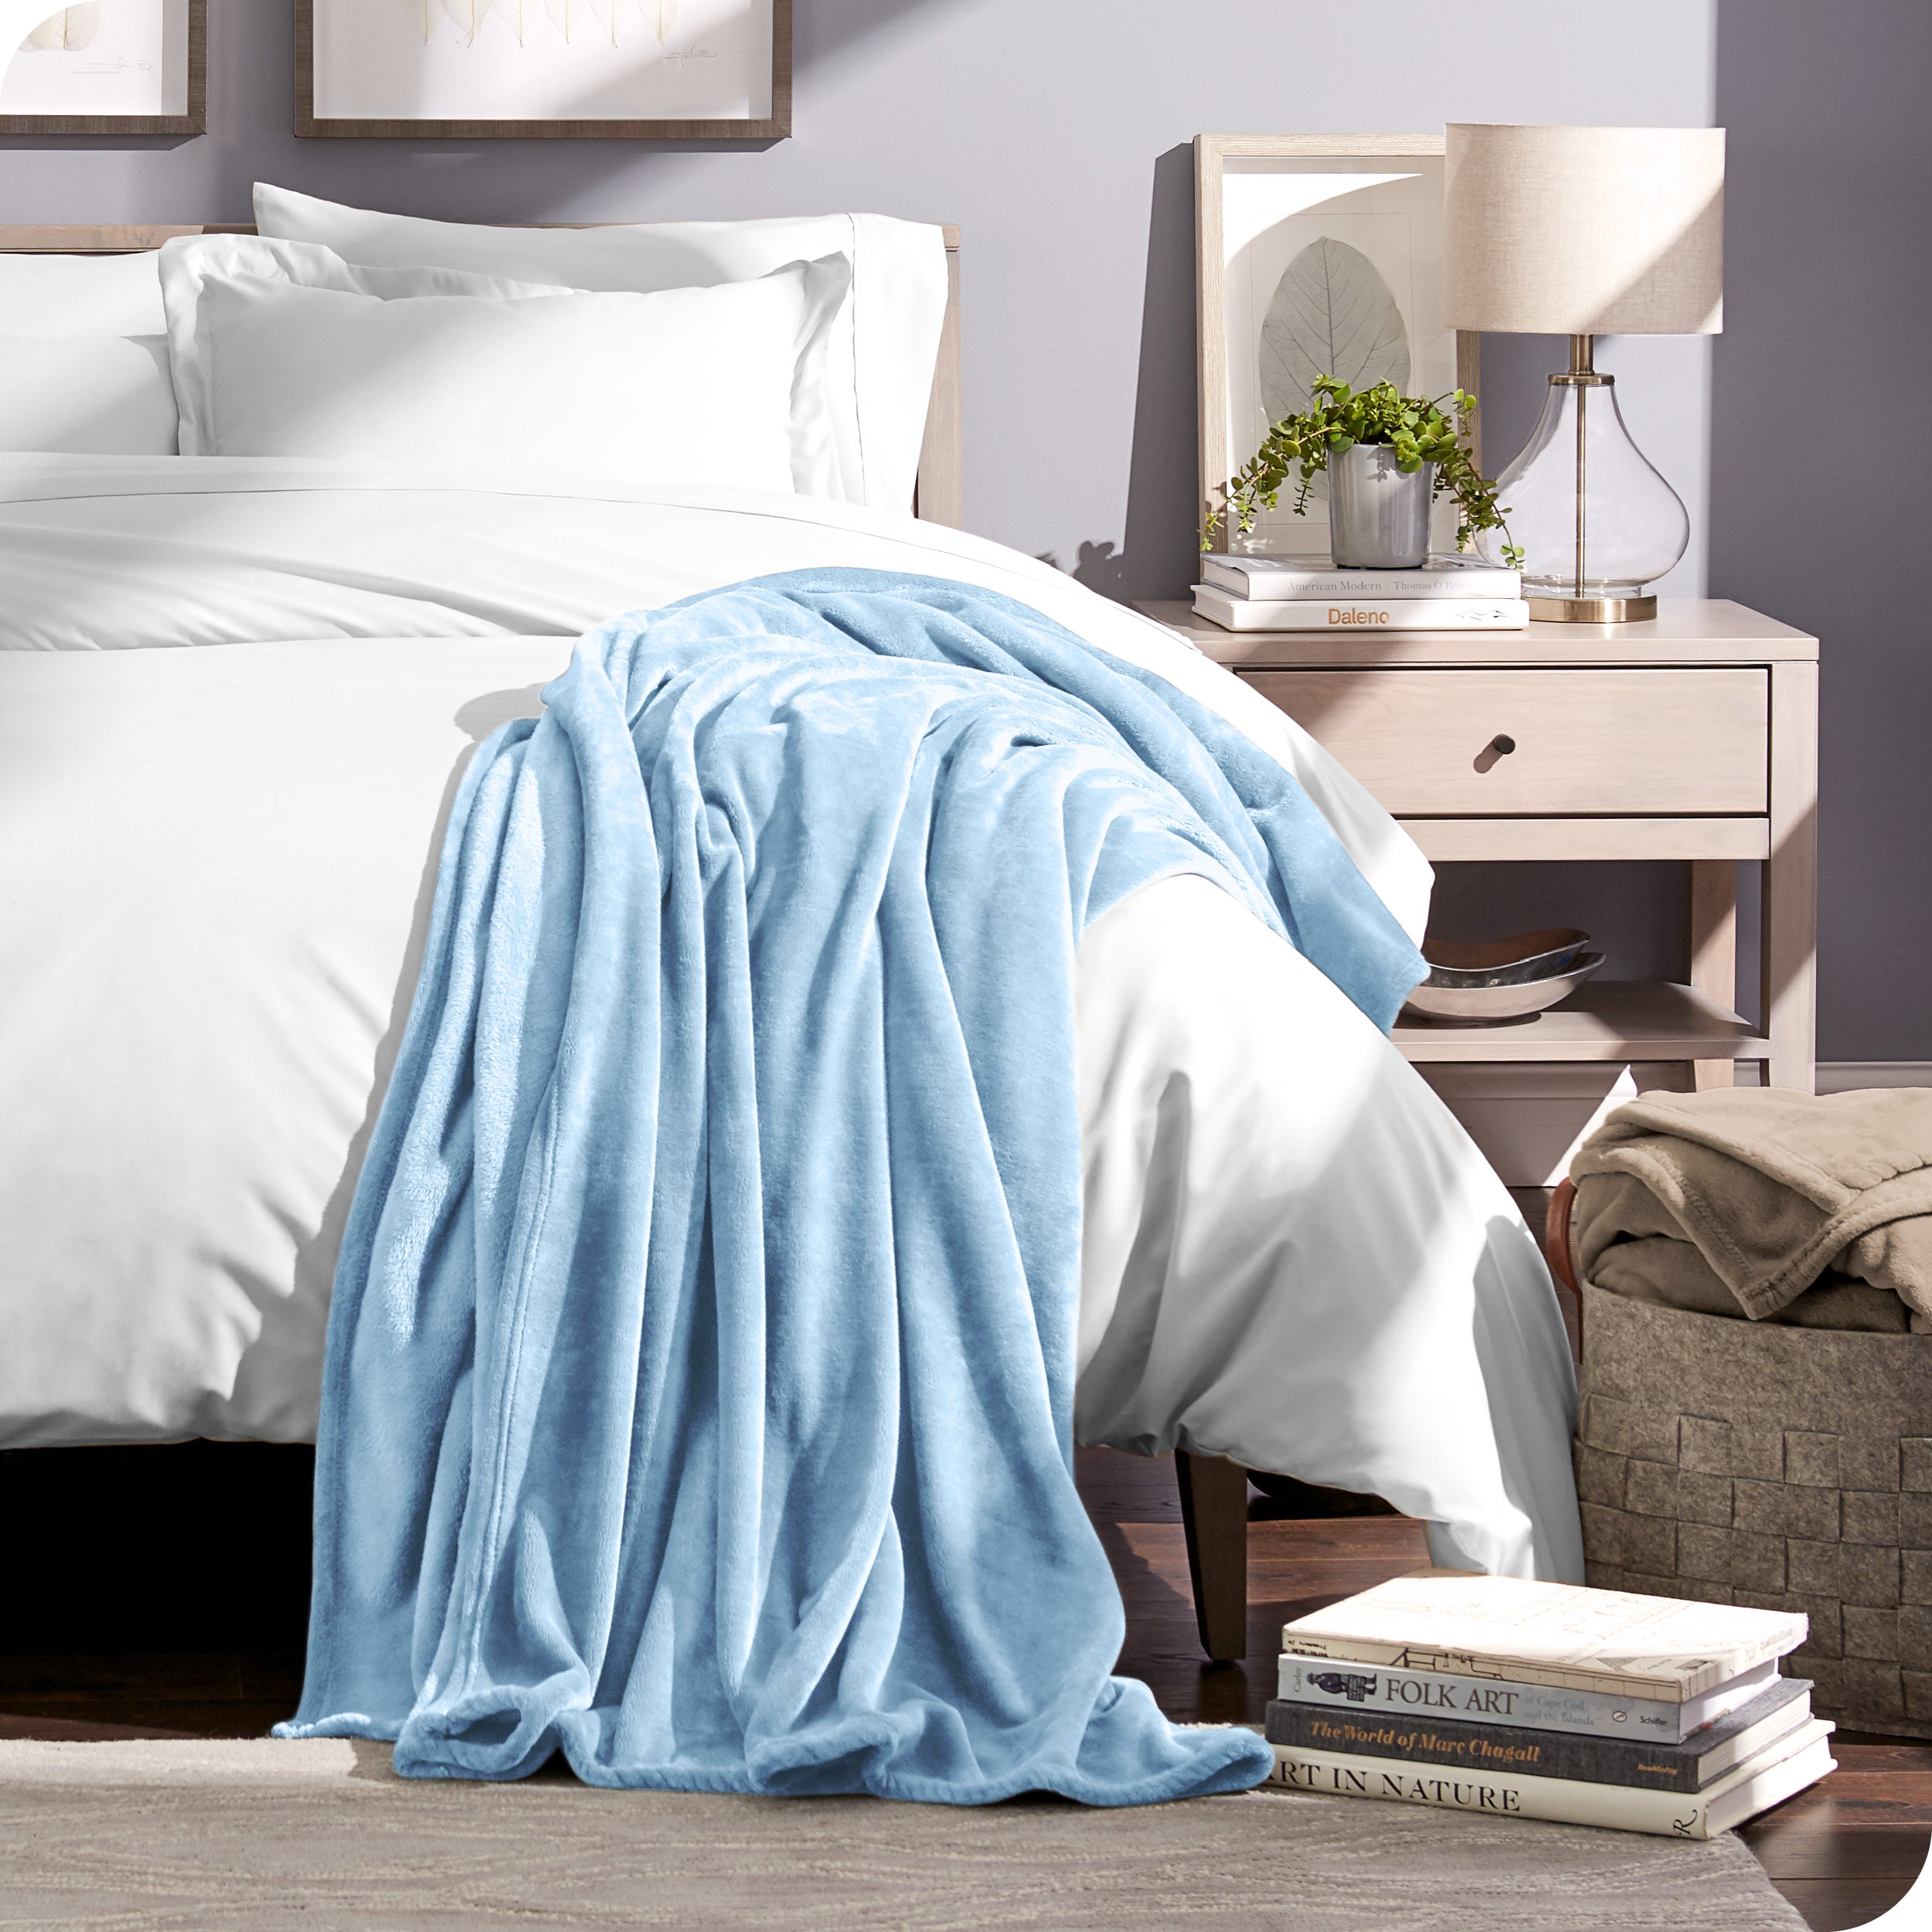 Microplush blanket draped over the end and side of a bed made with all white bedding. 